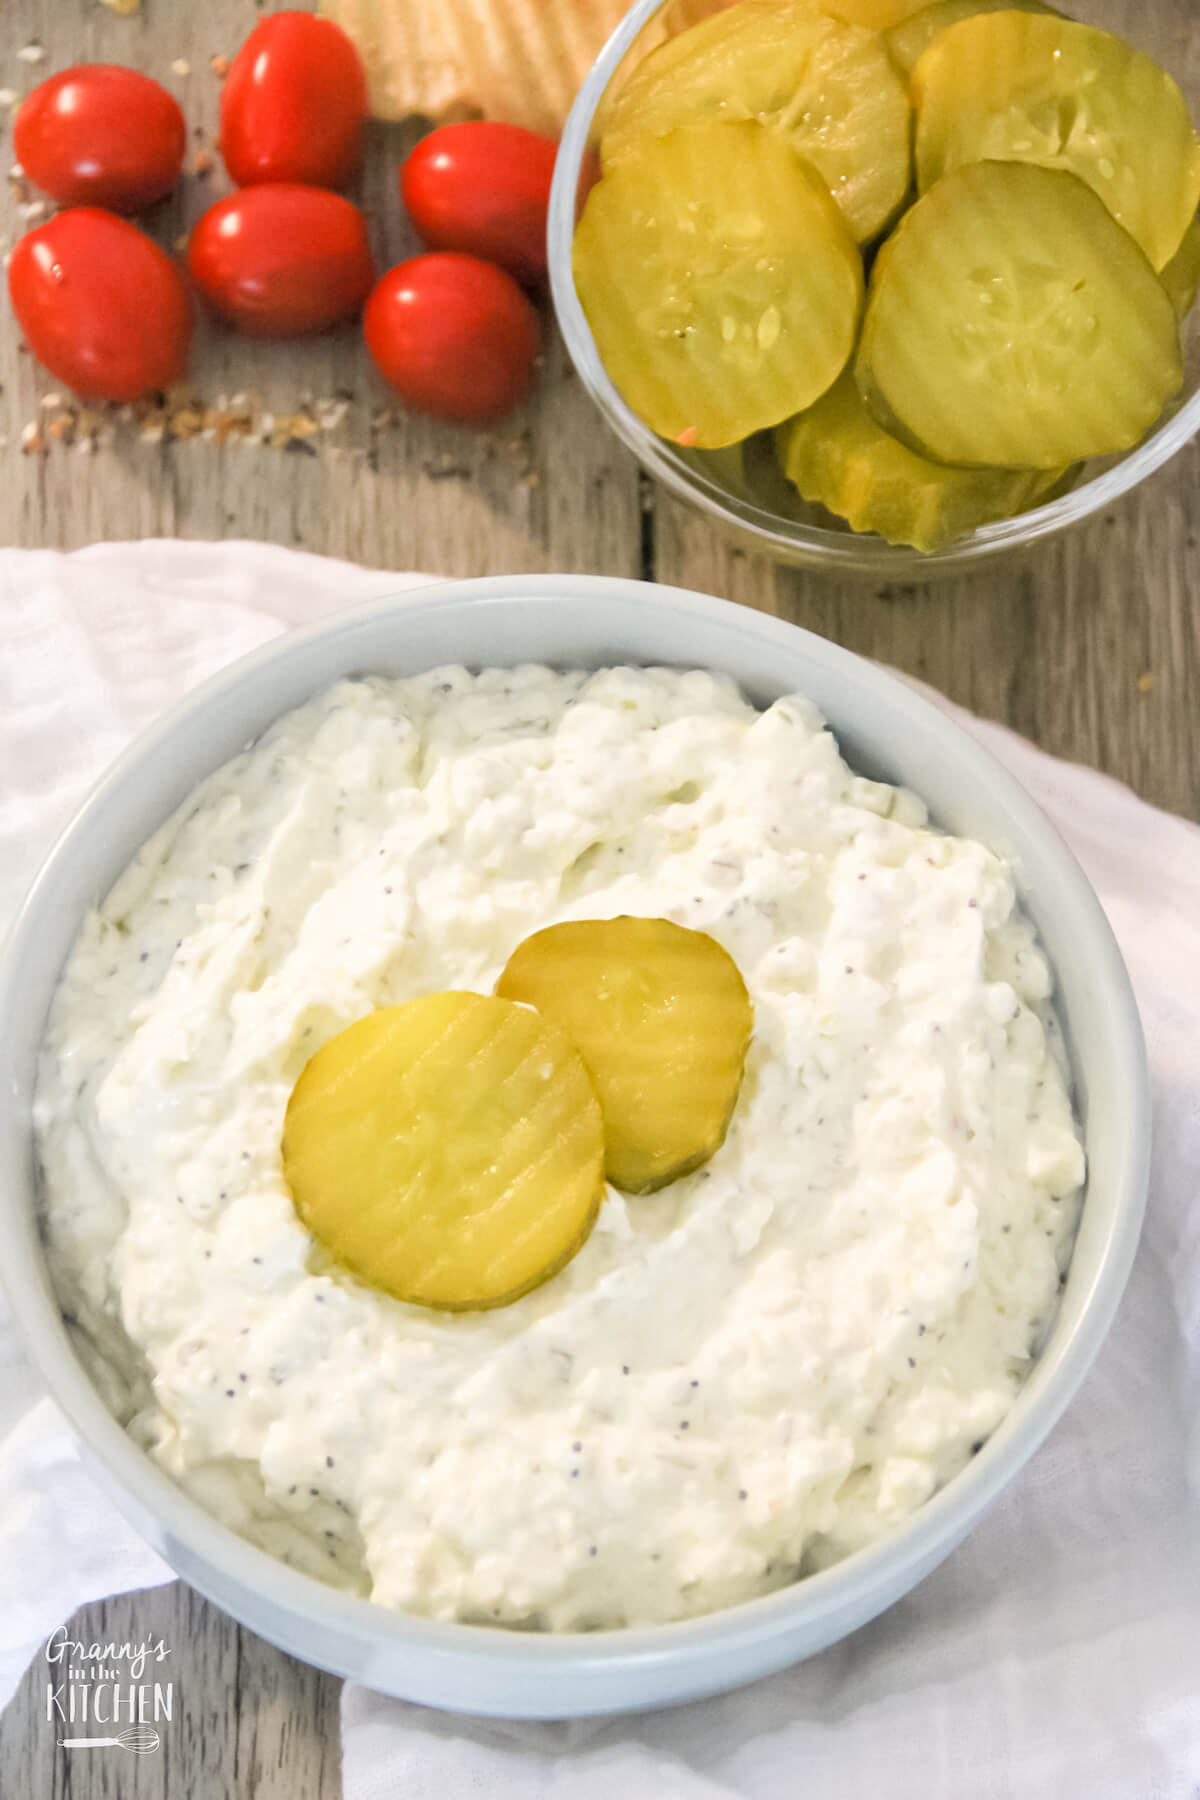 Completed bowl of Dill Pickle Dip